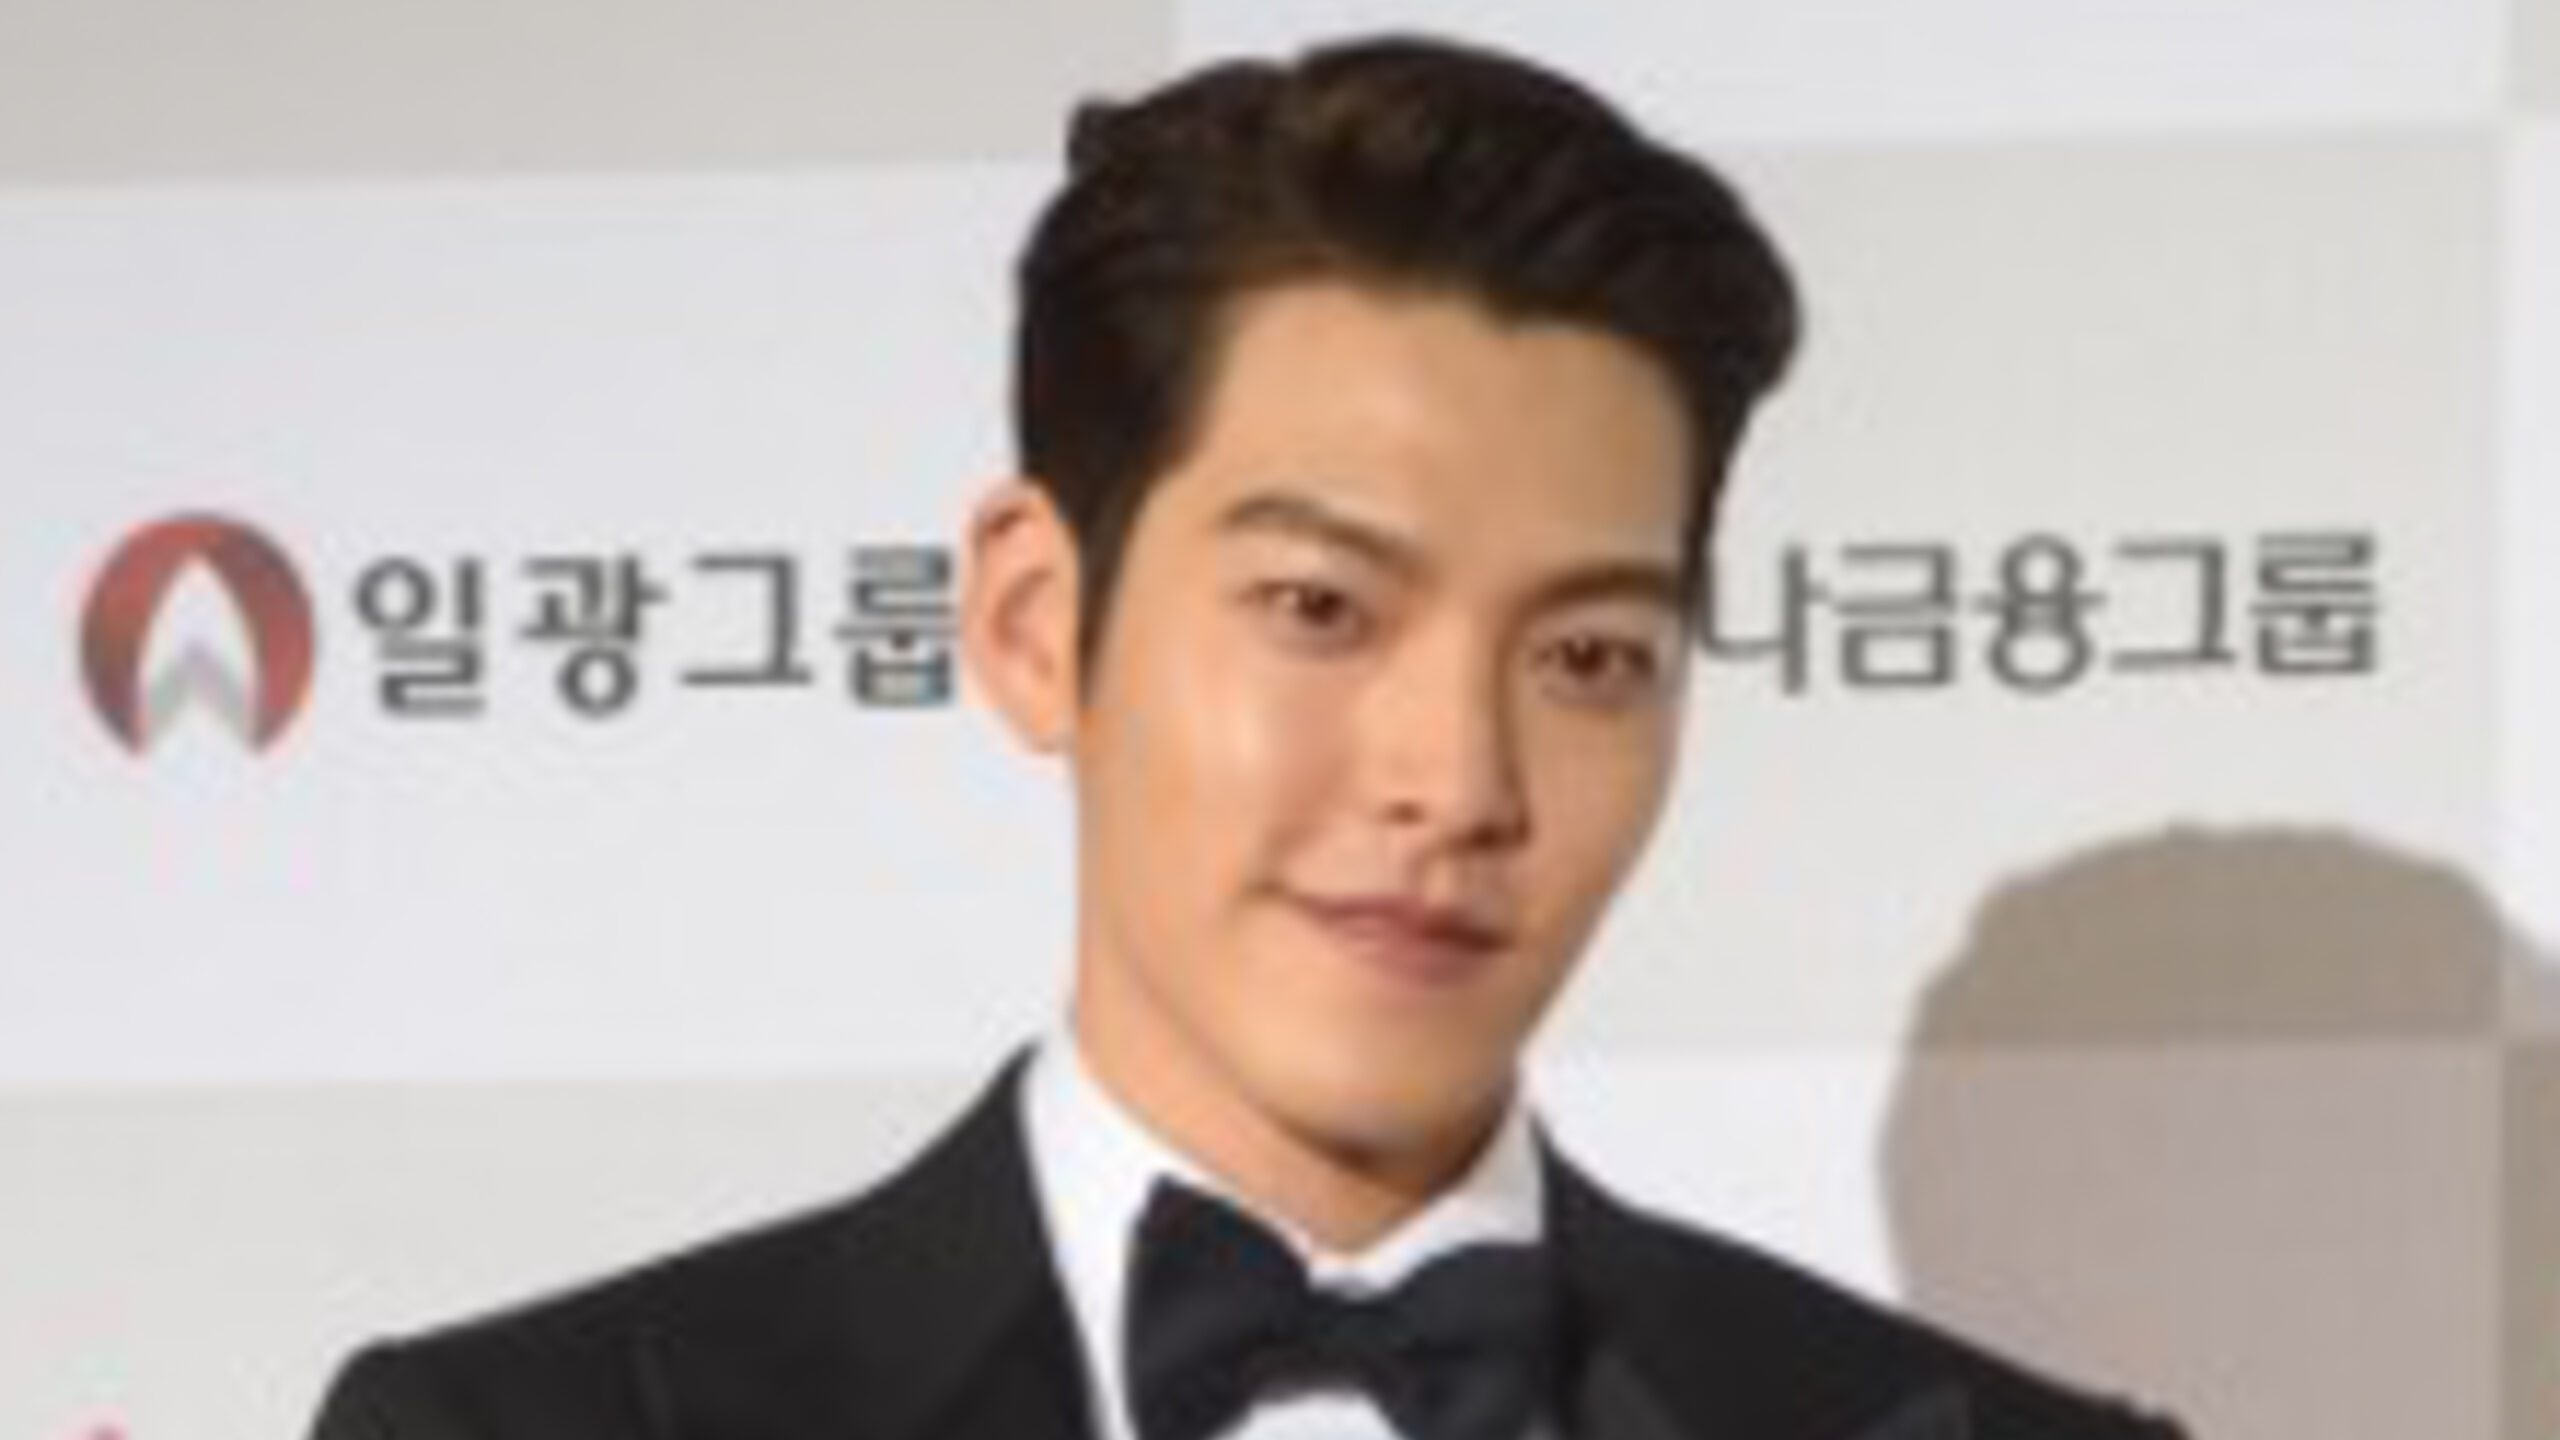 Korean actor Kim Woo Bin is diagnosed with nasopharyngeal cancer